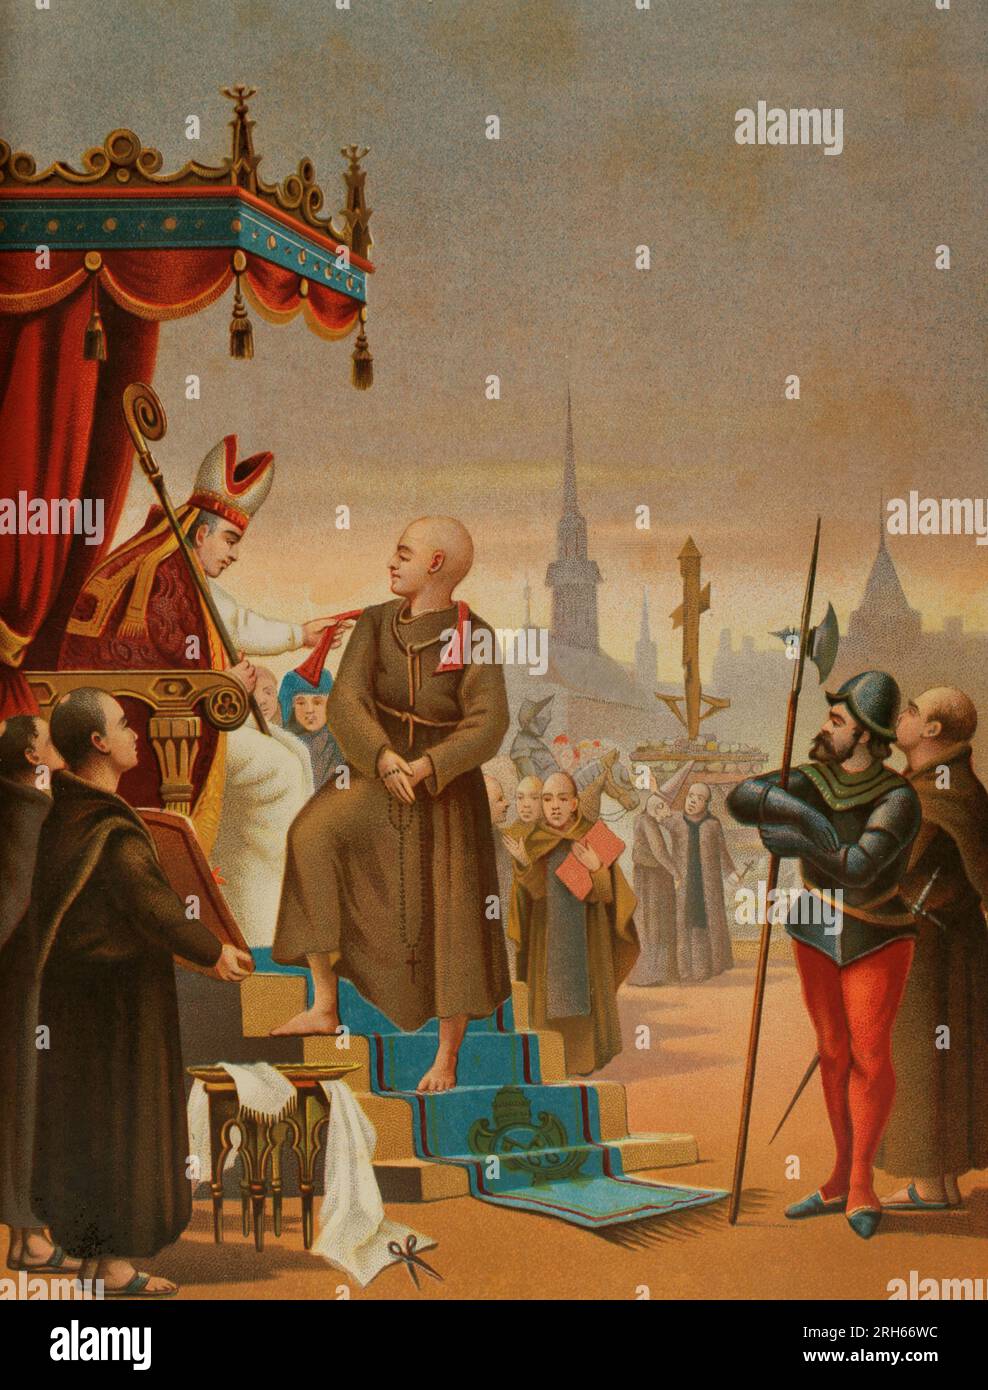 Girolamo Savonarola (1452-1498). Italian Dominican friar and preacher. Organiser of the Bonfire of the Vanities. Excommunicated and executed by the Tribunal of the Holy Inquisition. Degradation of Savonarola. Chromolithography. 'Historia Universal' (Universal History), by Cesar Cantu. Volume VII. Published in Barcelona, 1886. Stock Photo